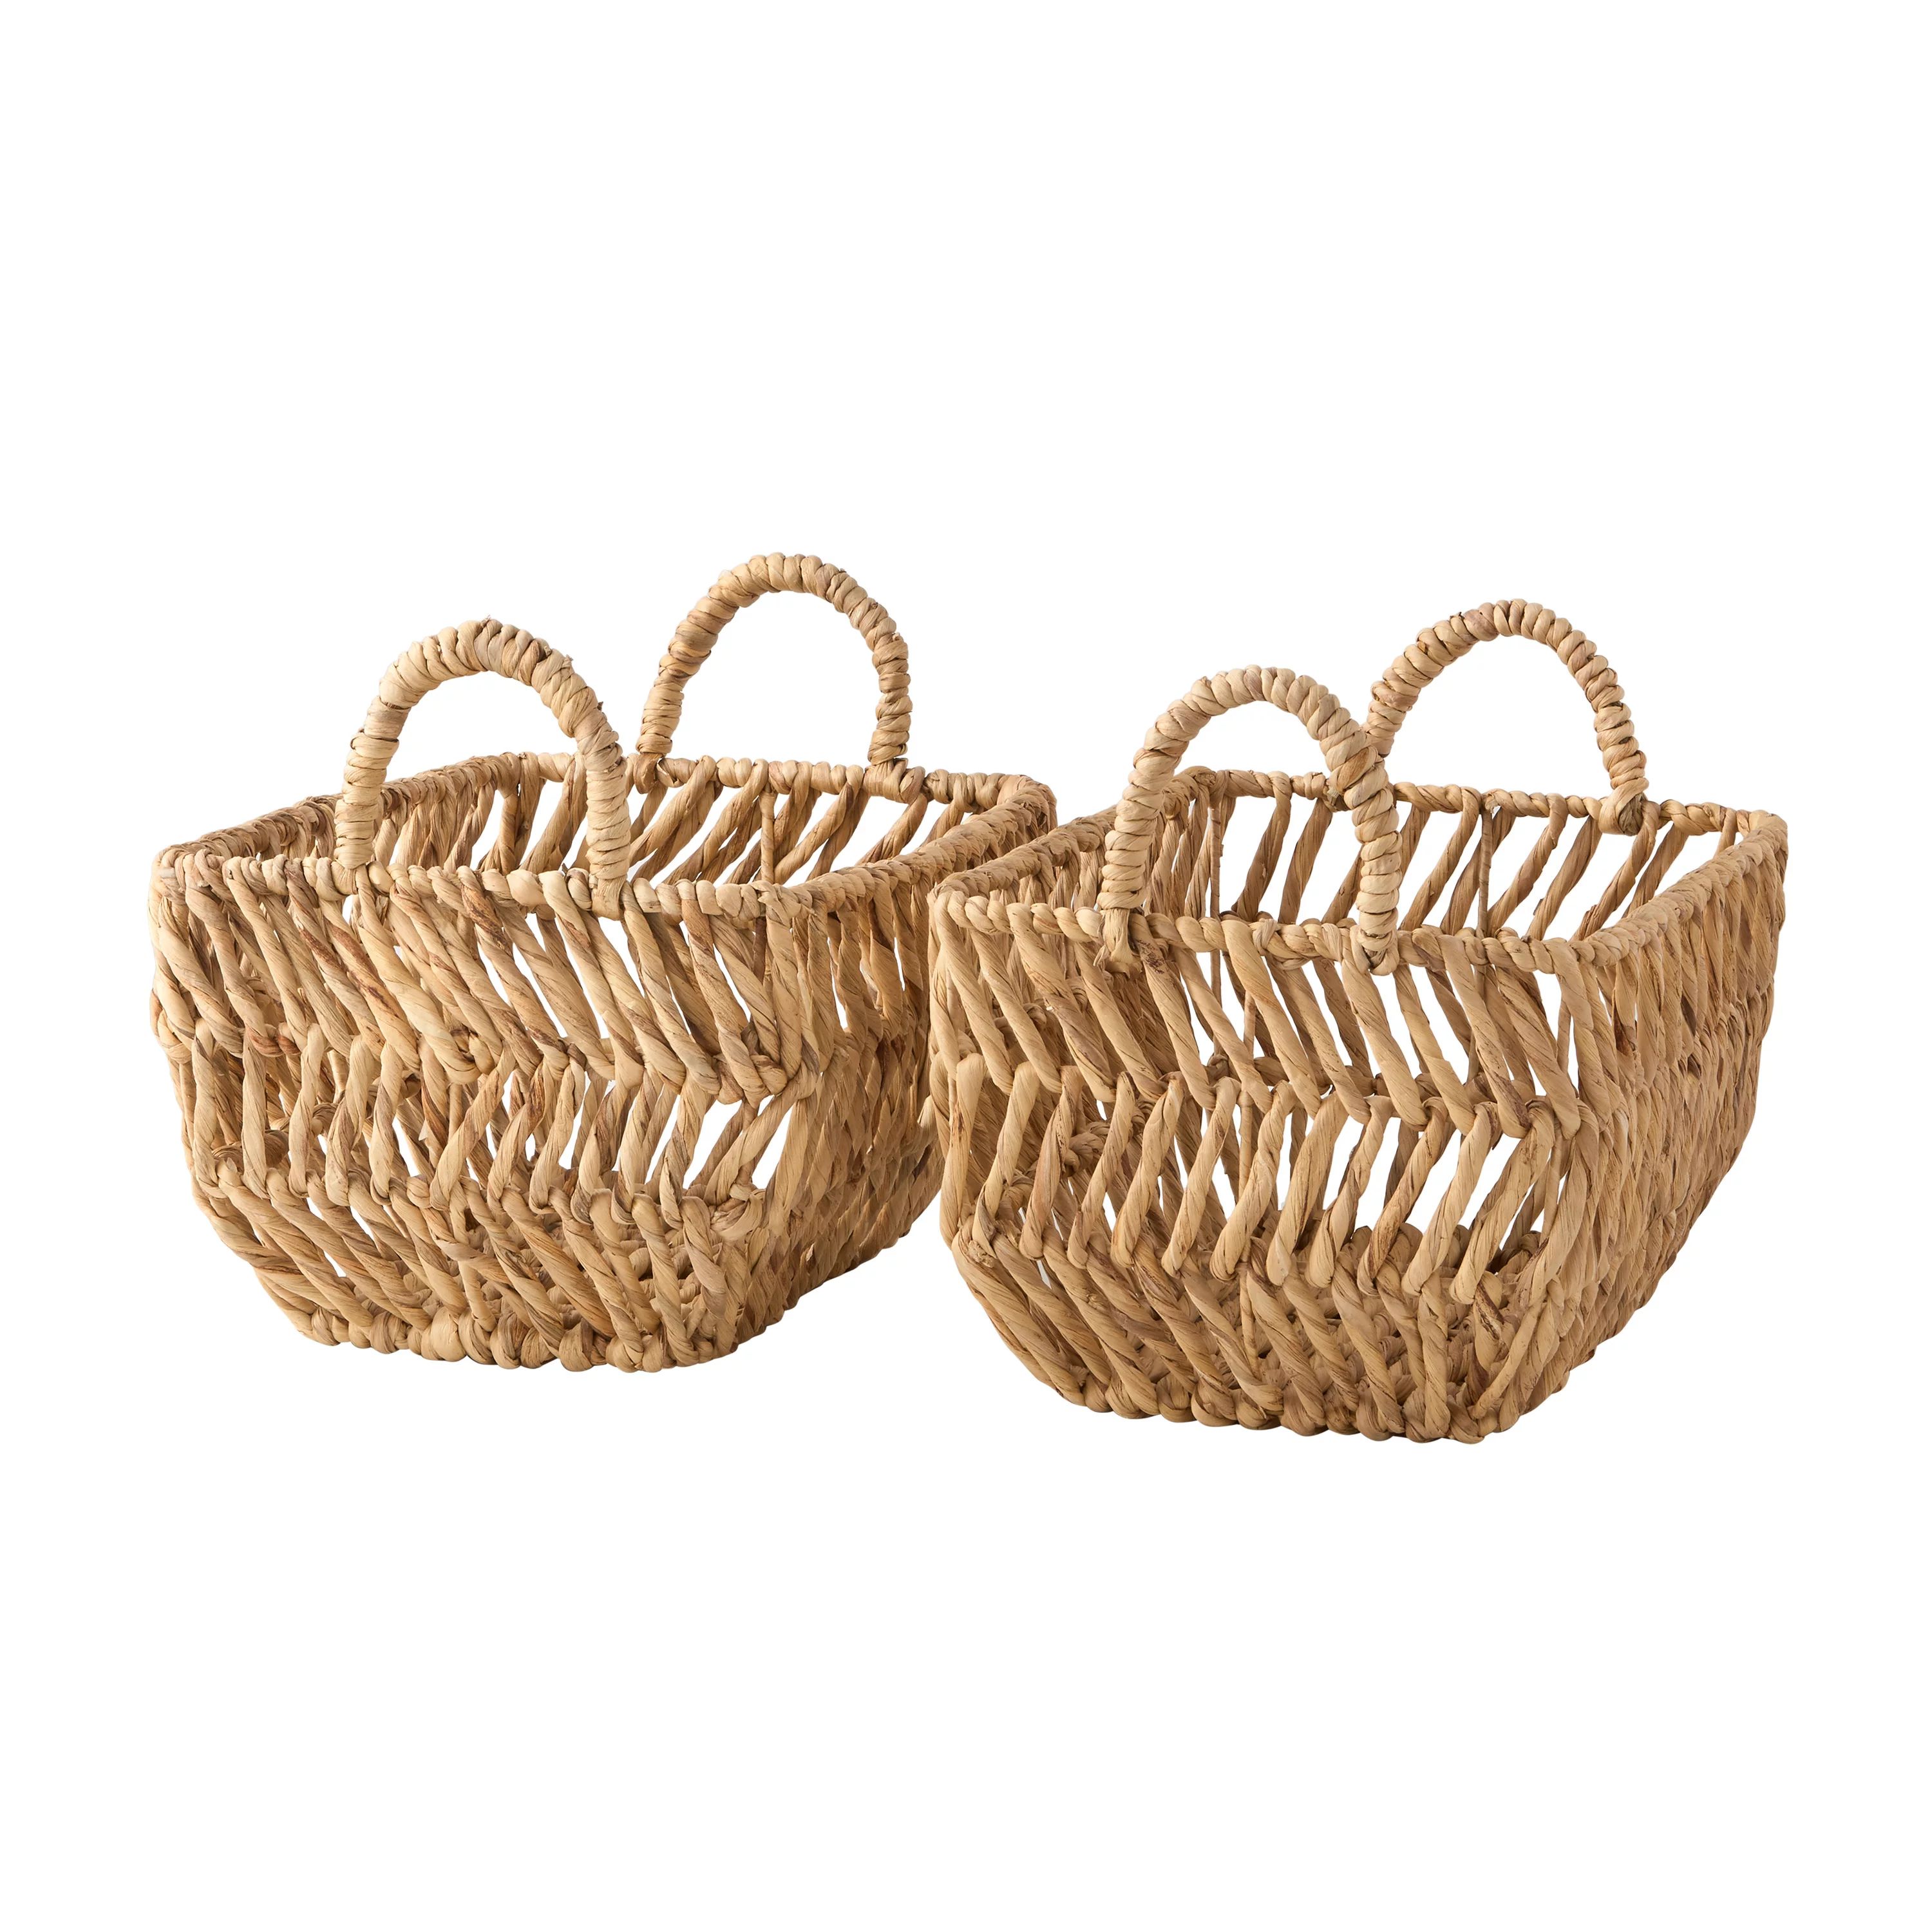 Dave & Jenny Marrs for Better Homes & Gardens Natural Water Hyacinth Baskets, Set of 2 | Walmart (US)